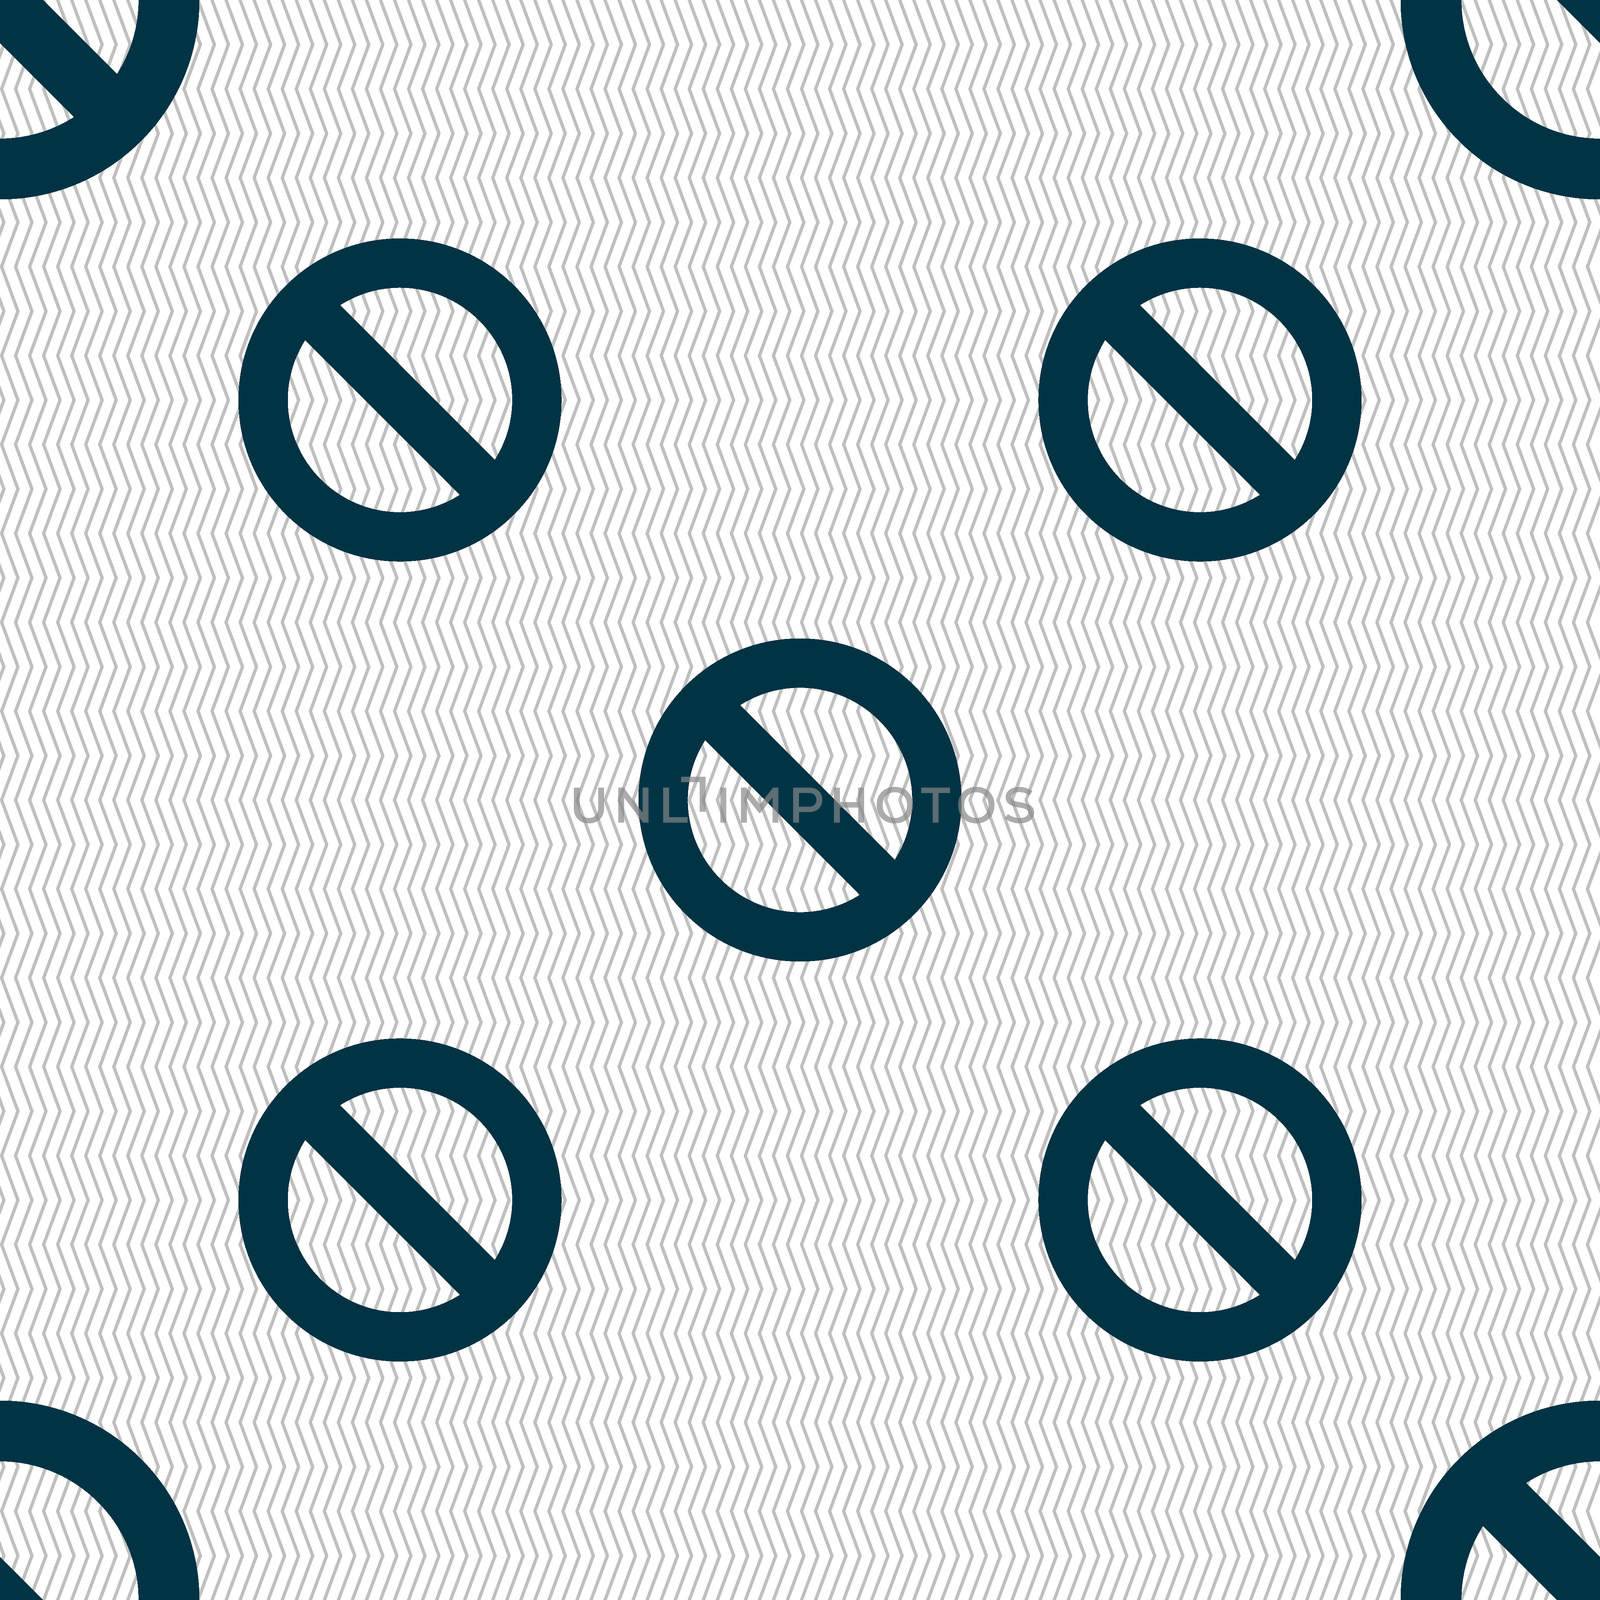 Stop sign icon. Prohibition symbol. No sign. Seamless abstract background with geometric shapes. illustration